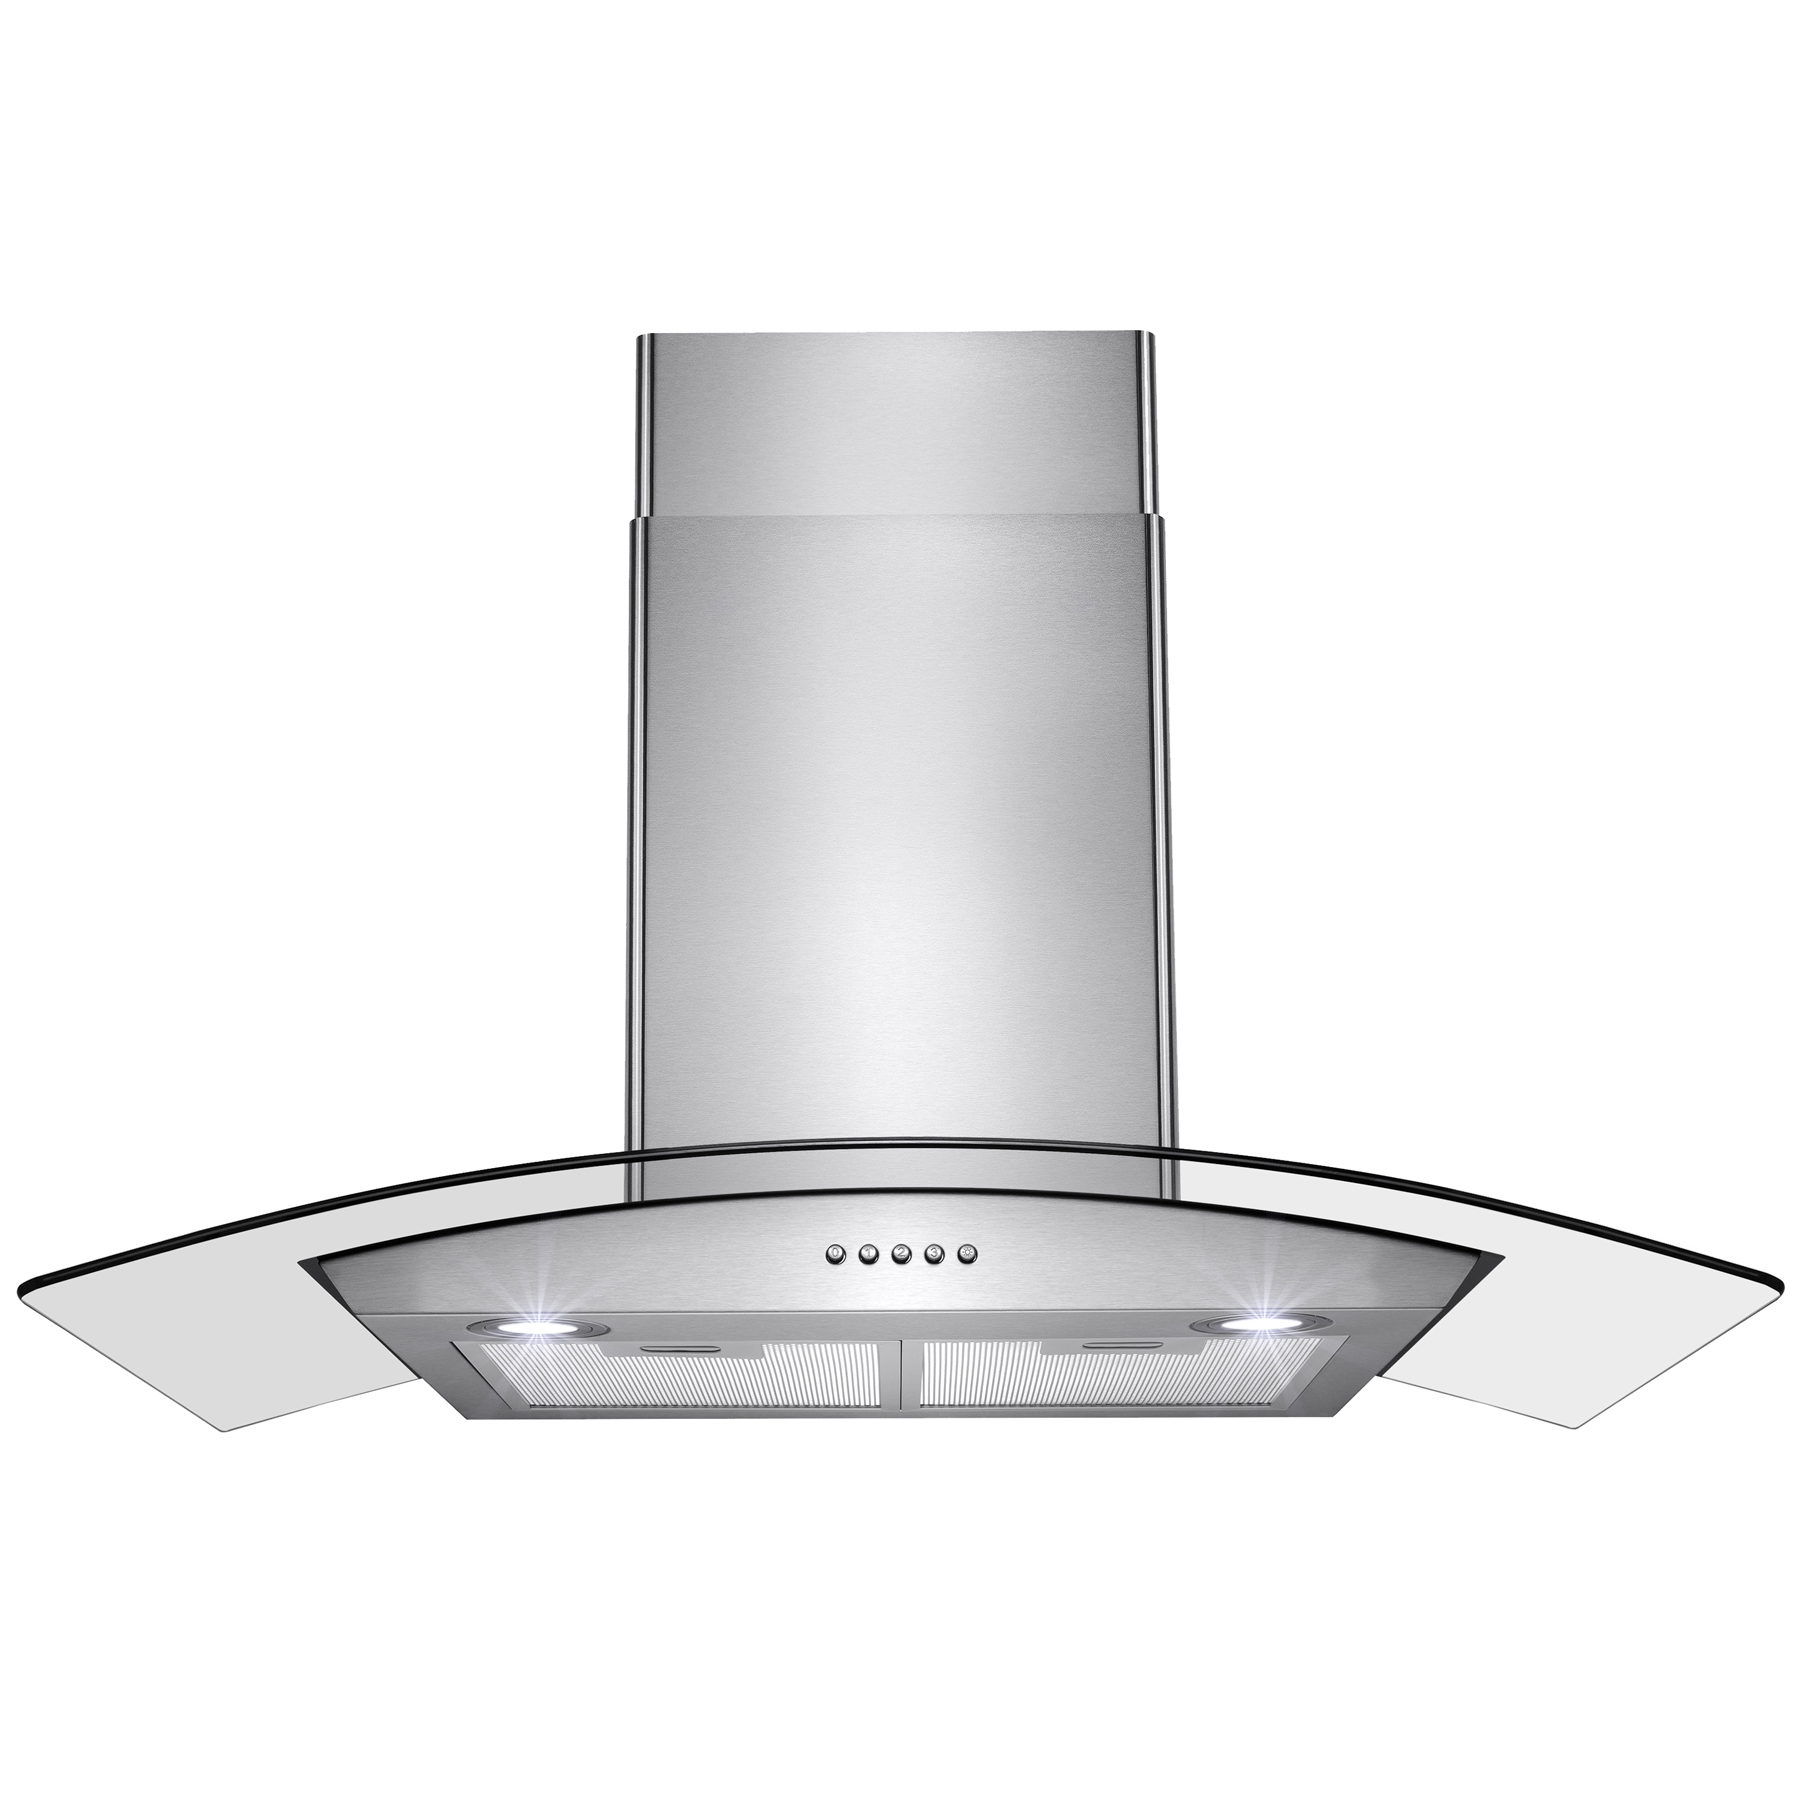 AKDY 36" Stainless Steel Tempered Glass Wall Mount Kitchen Vent Range Hood Push Buttons w/ Mesh Filter LED Lights - image 2 of 14